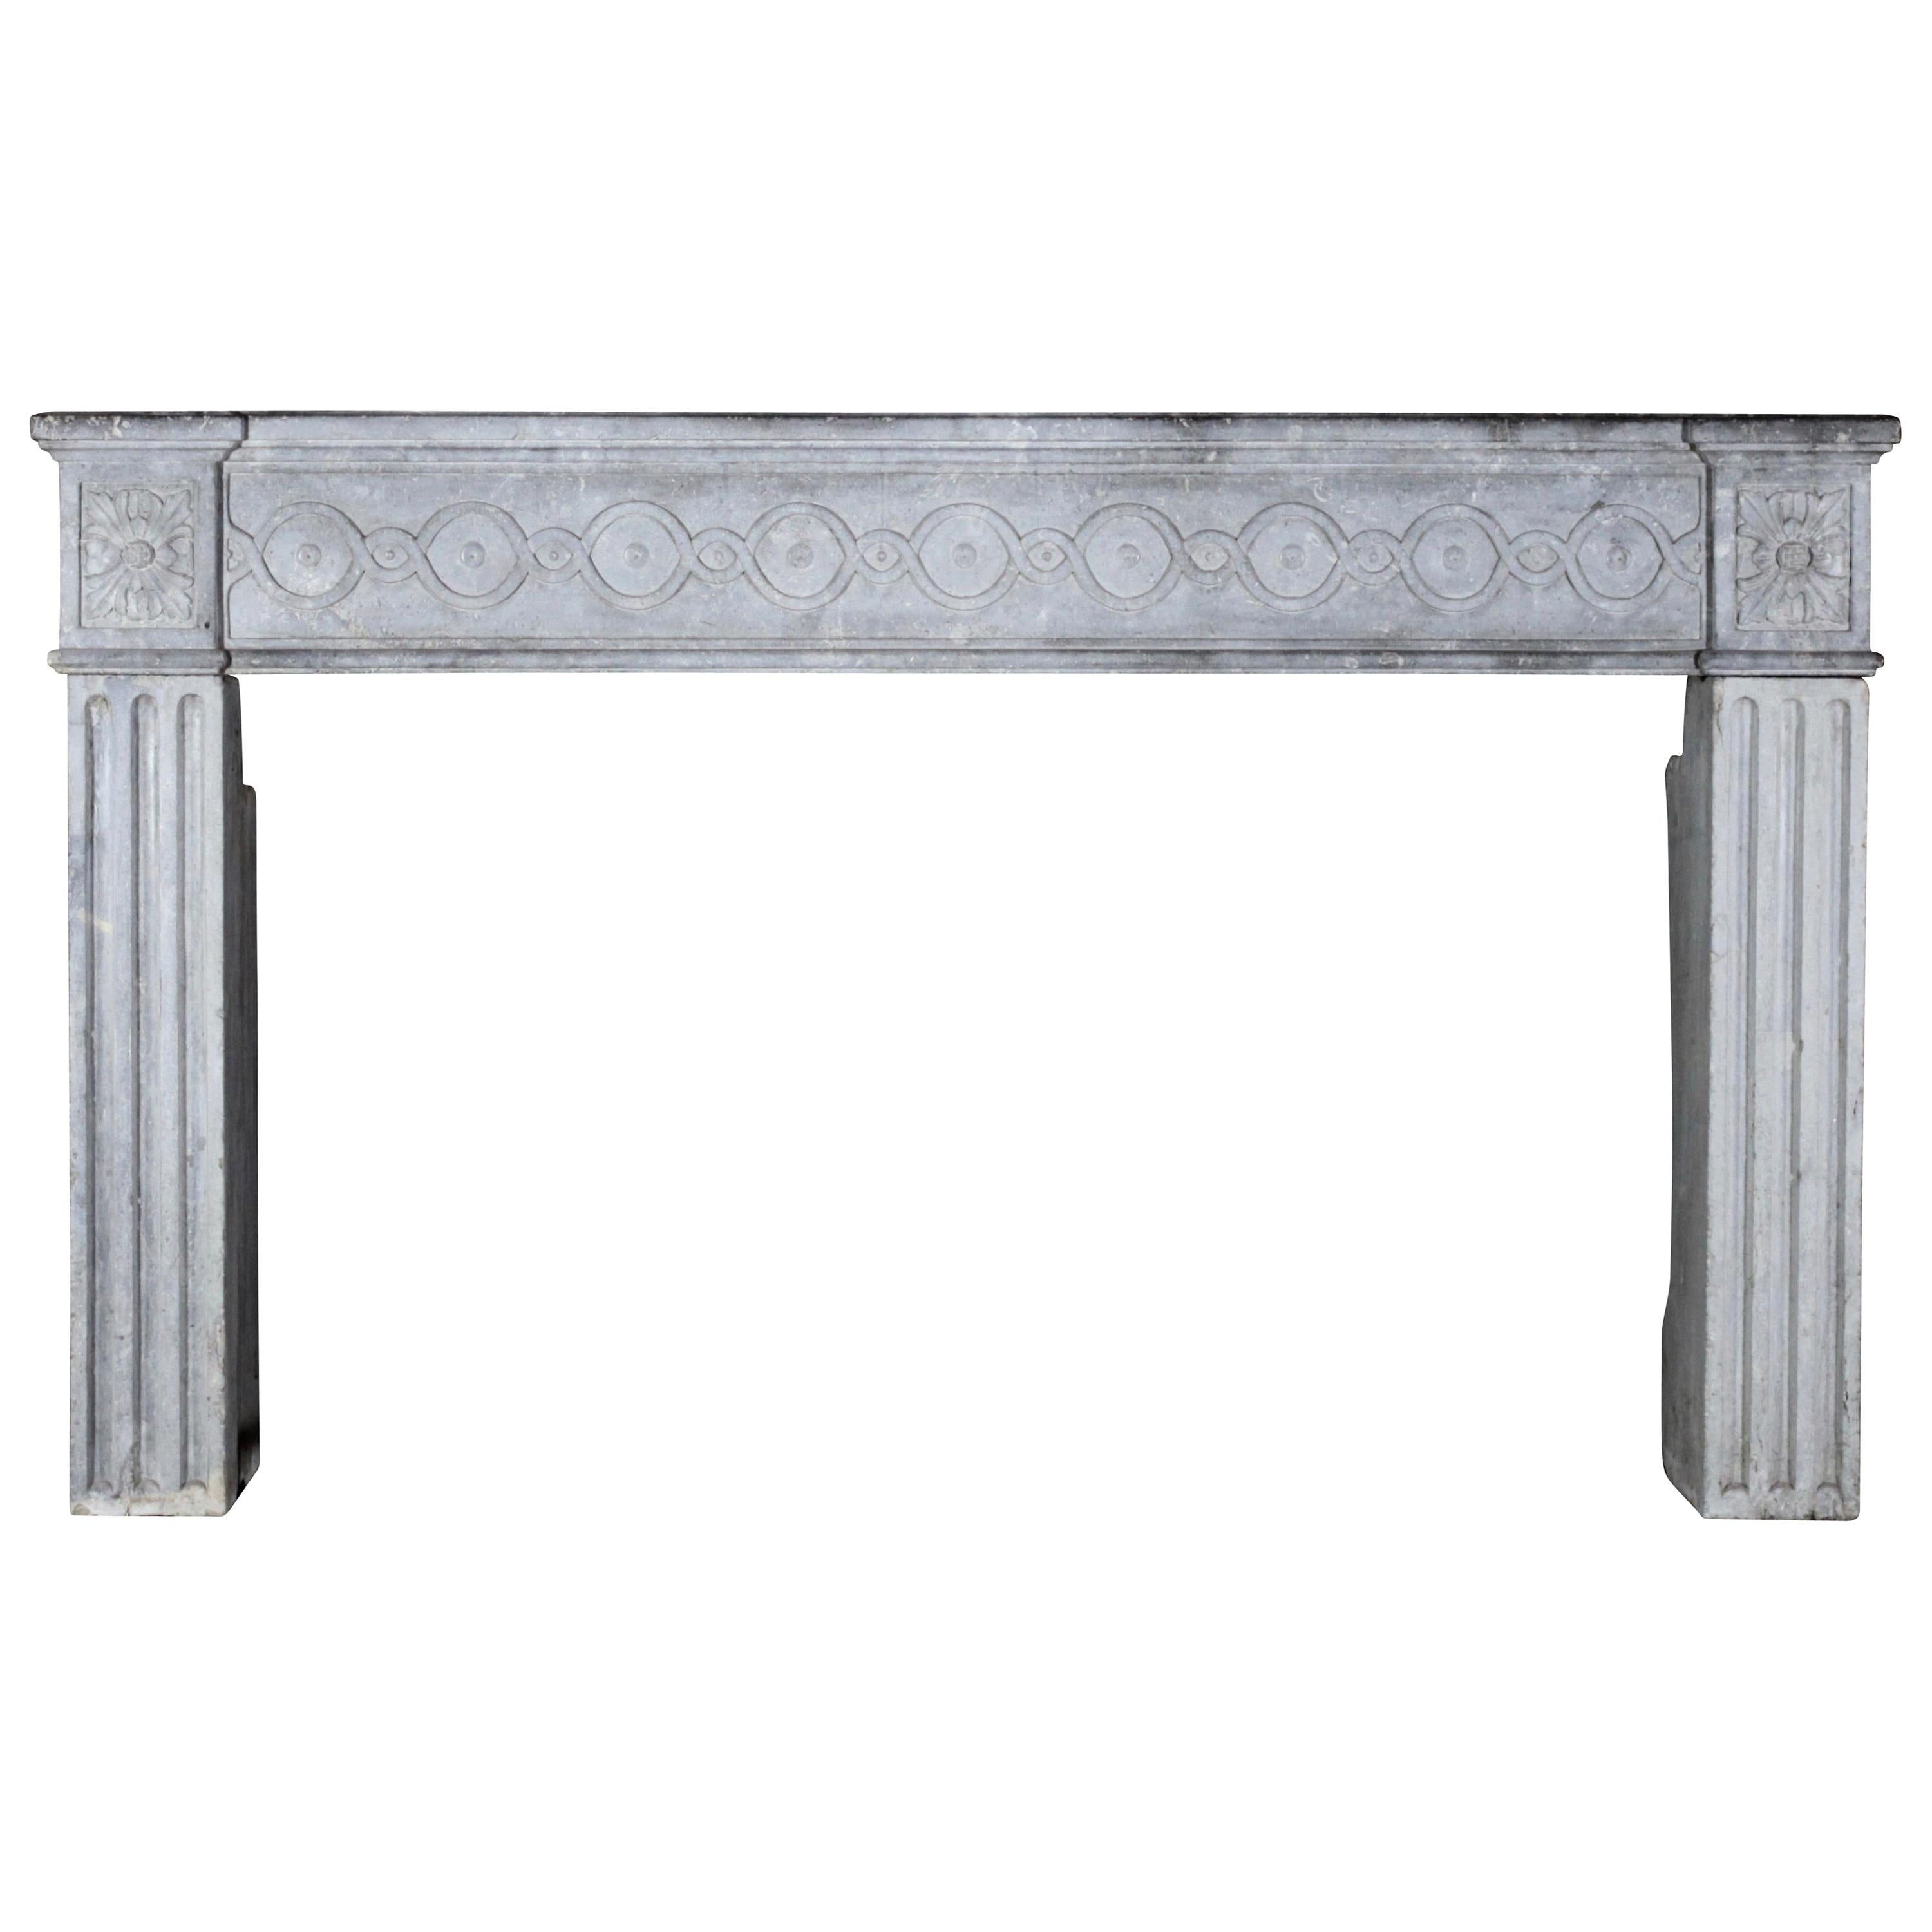 18th Century Period French Timely Grey Hard Limestone Fireplace Surround